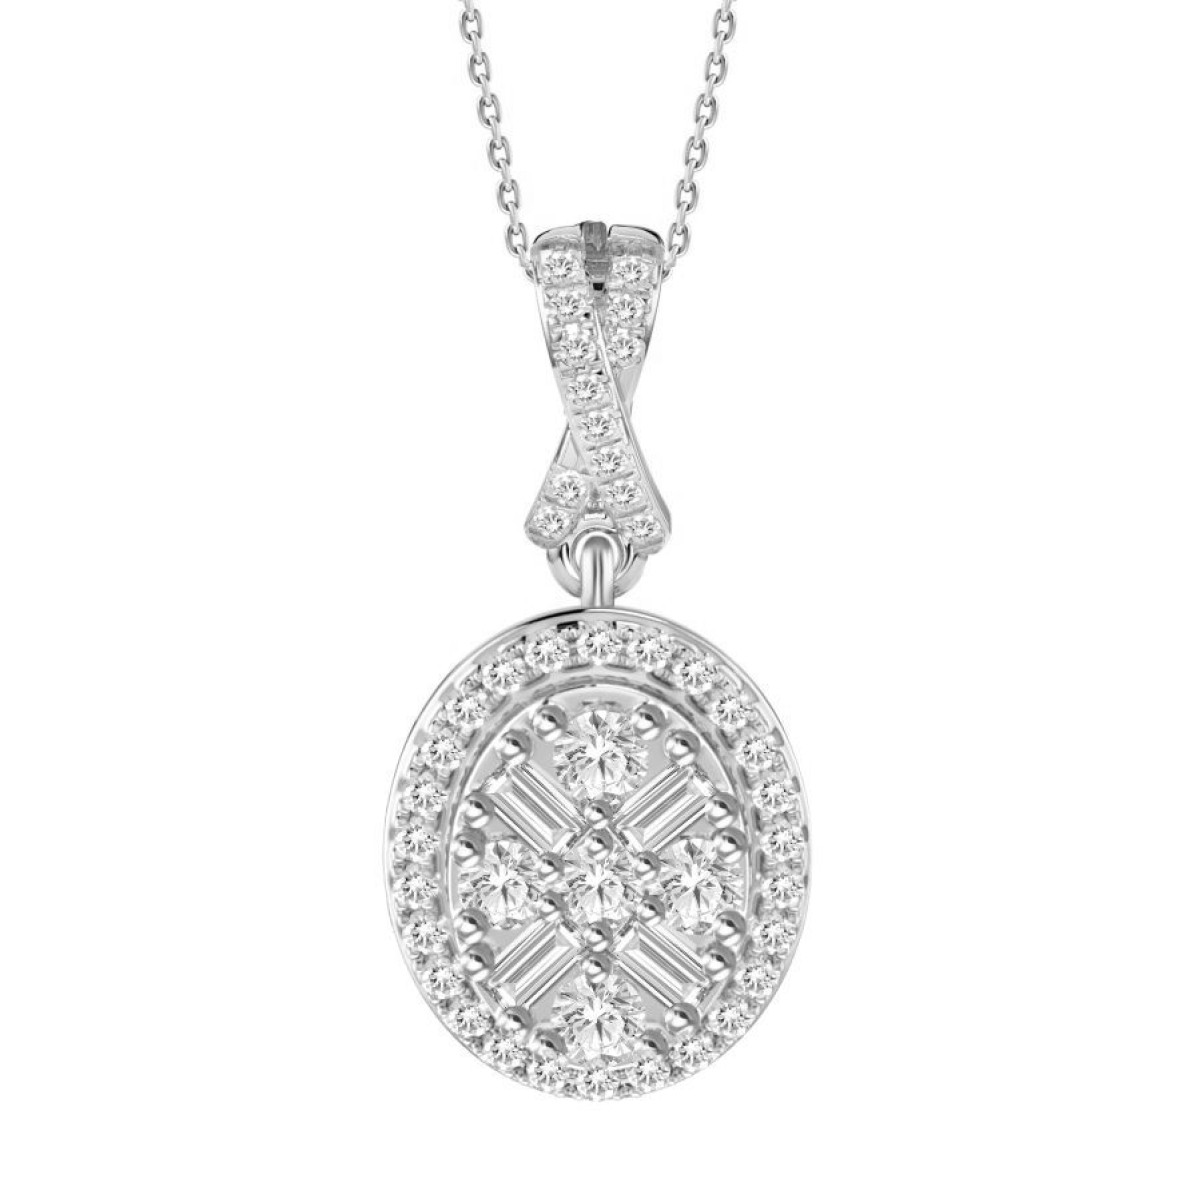 LADIES PENDANT WITH CHAIN 0.20CT ROUND/BAGUETTE DIAMOND 10K WHITE GOLD